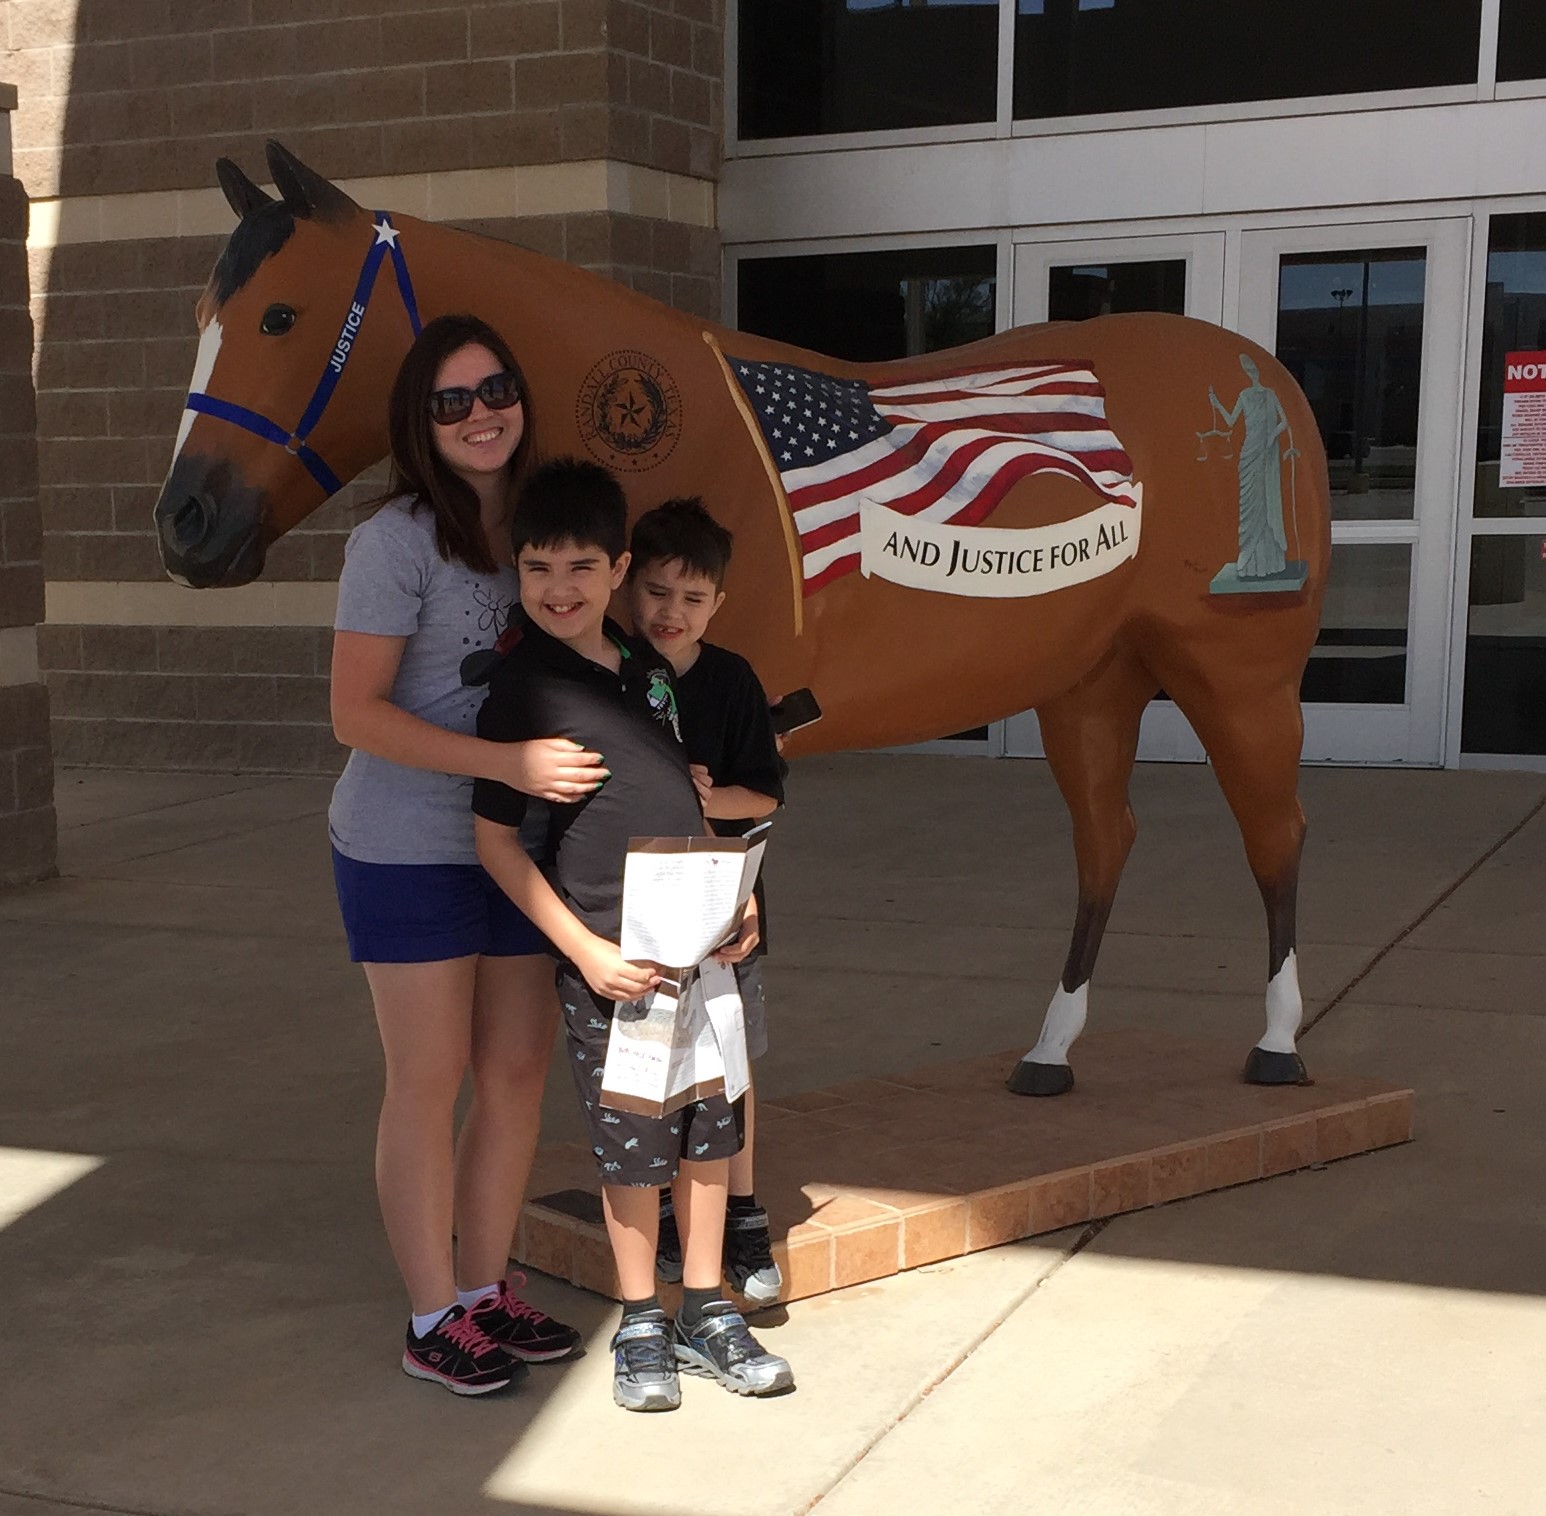 This is the last Hoof Prints horse I'm going to put up here. His name is Justice and he is one of the horses that is part of Hoof Prints but not located in Amarillo. You can find Justice in Canyon, Texas at the Randall Country Justice Center.